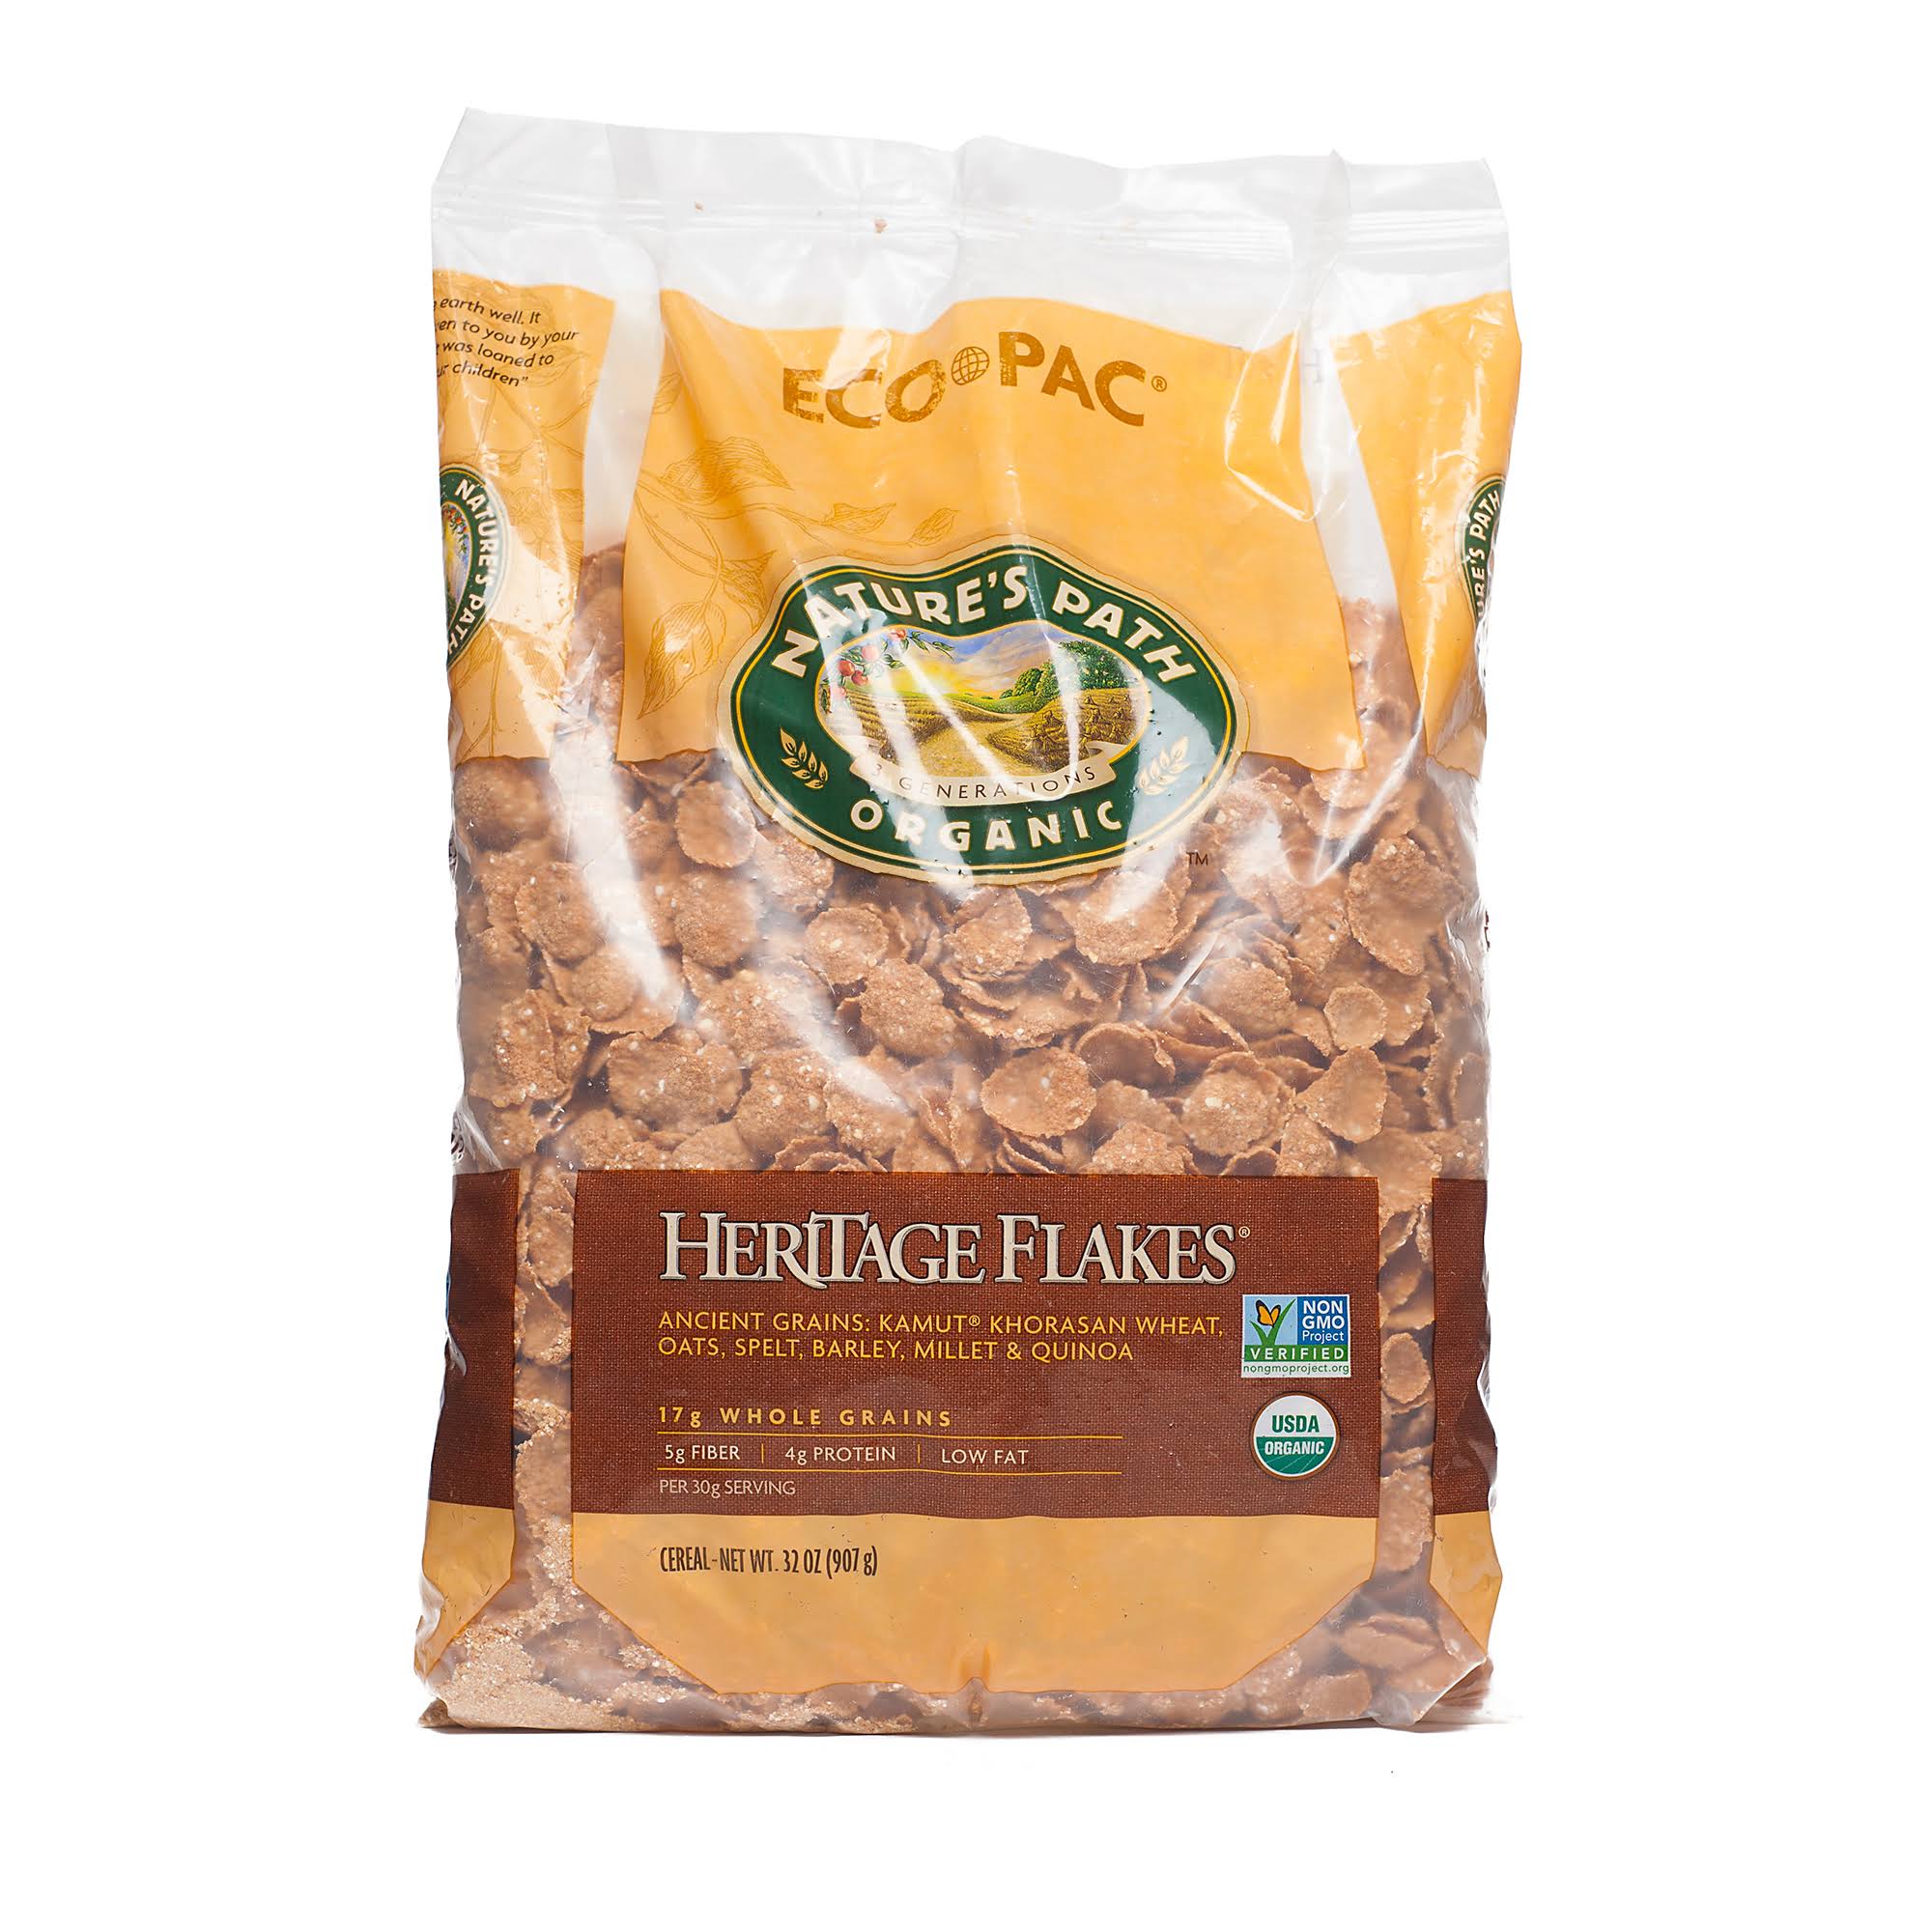 Nature's Path Organic Eco Pac Heritage Flakes Cereal - 32 oz